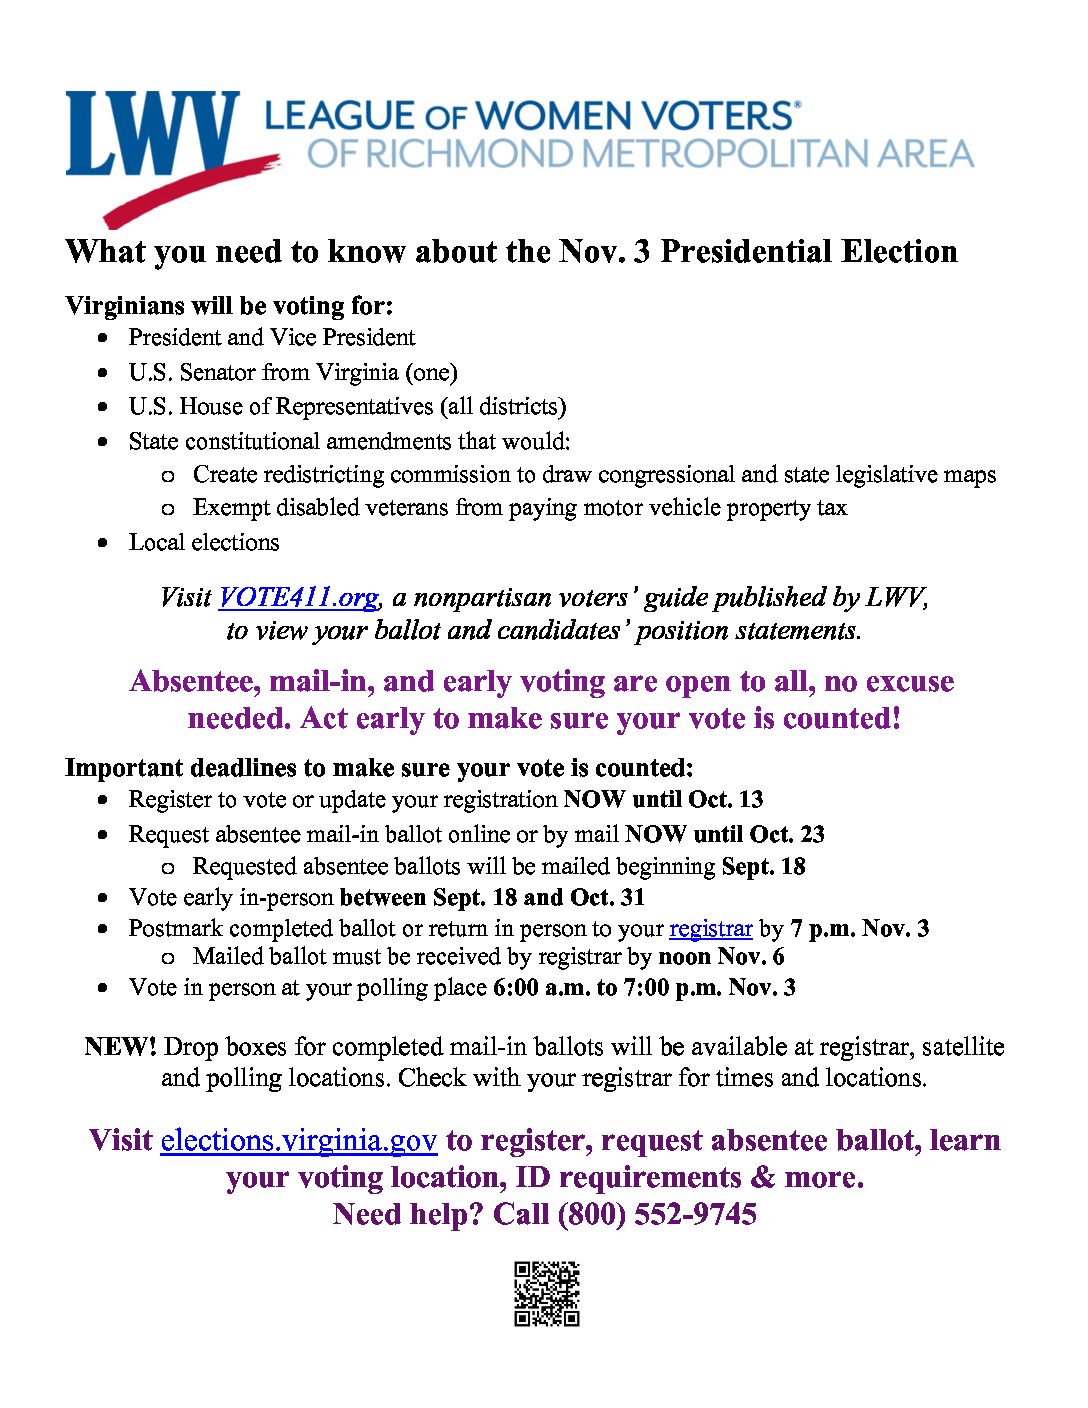 LWV-RMA Fact Sheets. Curious about the upcoming elections?